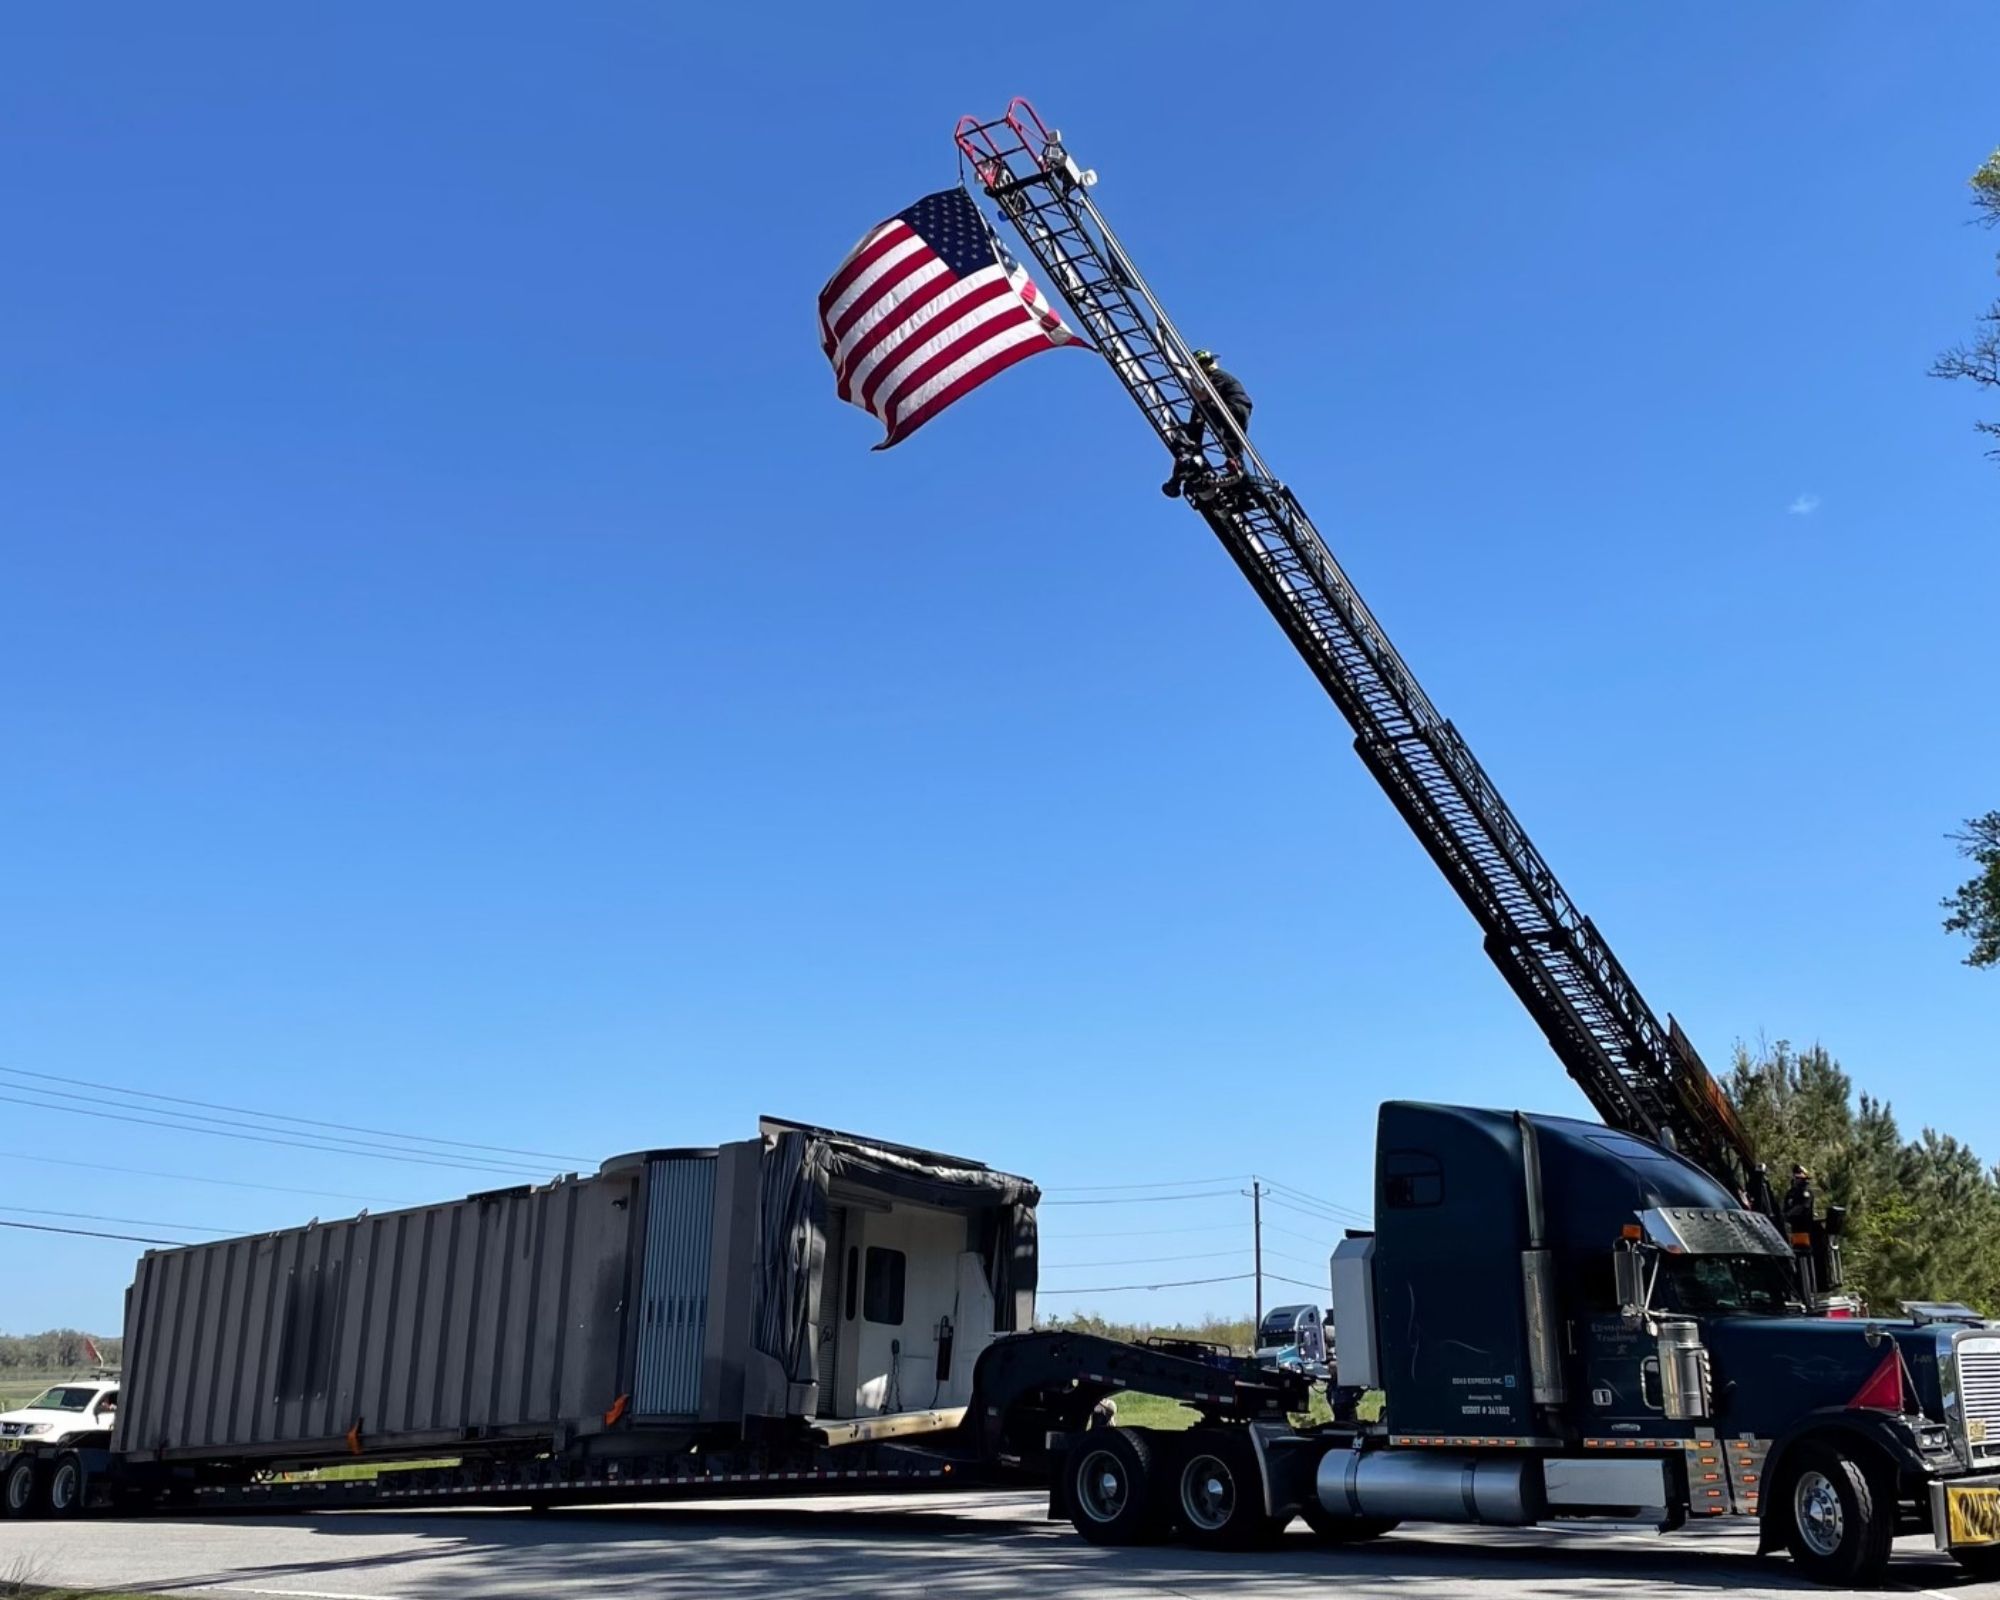 A crane raises the American flag over the jetway, which appears on the bed of a large truck